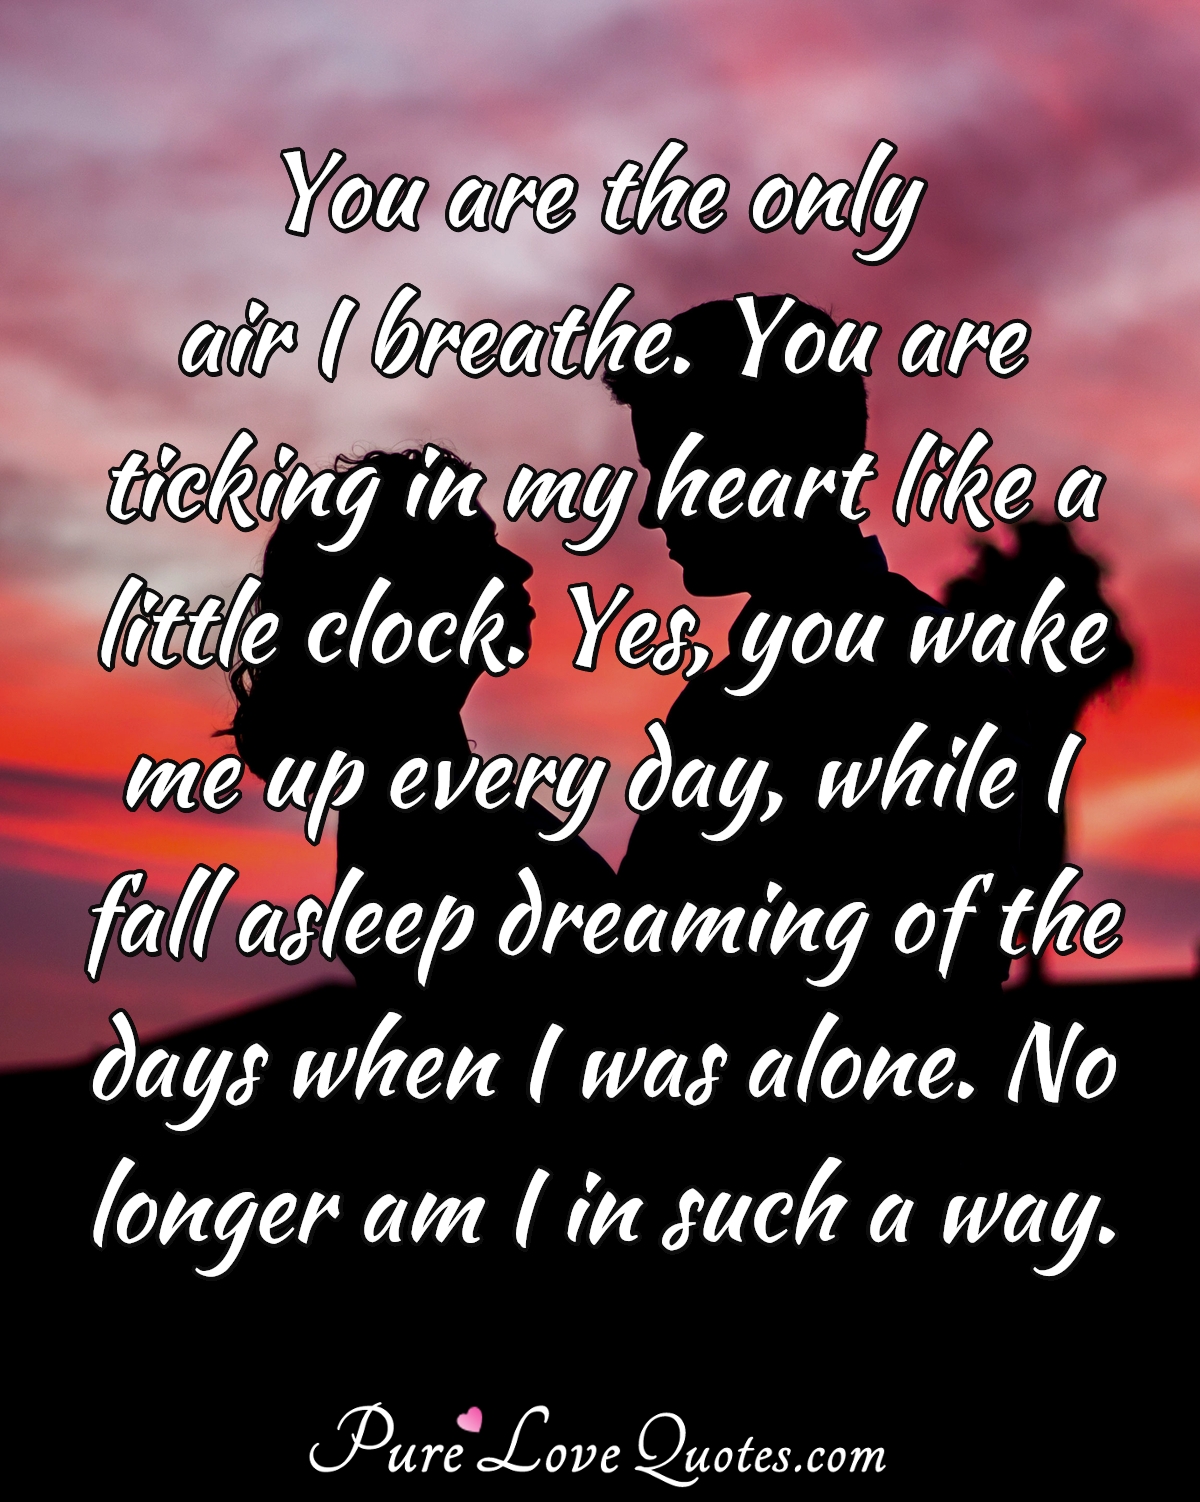 You are the only air I breathe. You are ticking in my heart like a little clock. Yes, you wake me up every day, while I fall asleep dreaming of the days when I was alone. No longer am I in such a way. - Anonymous